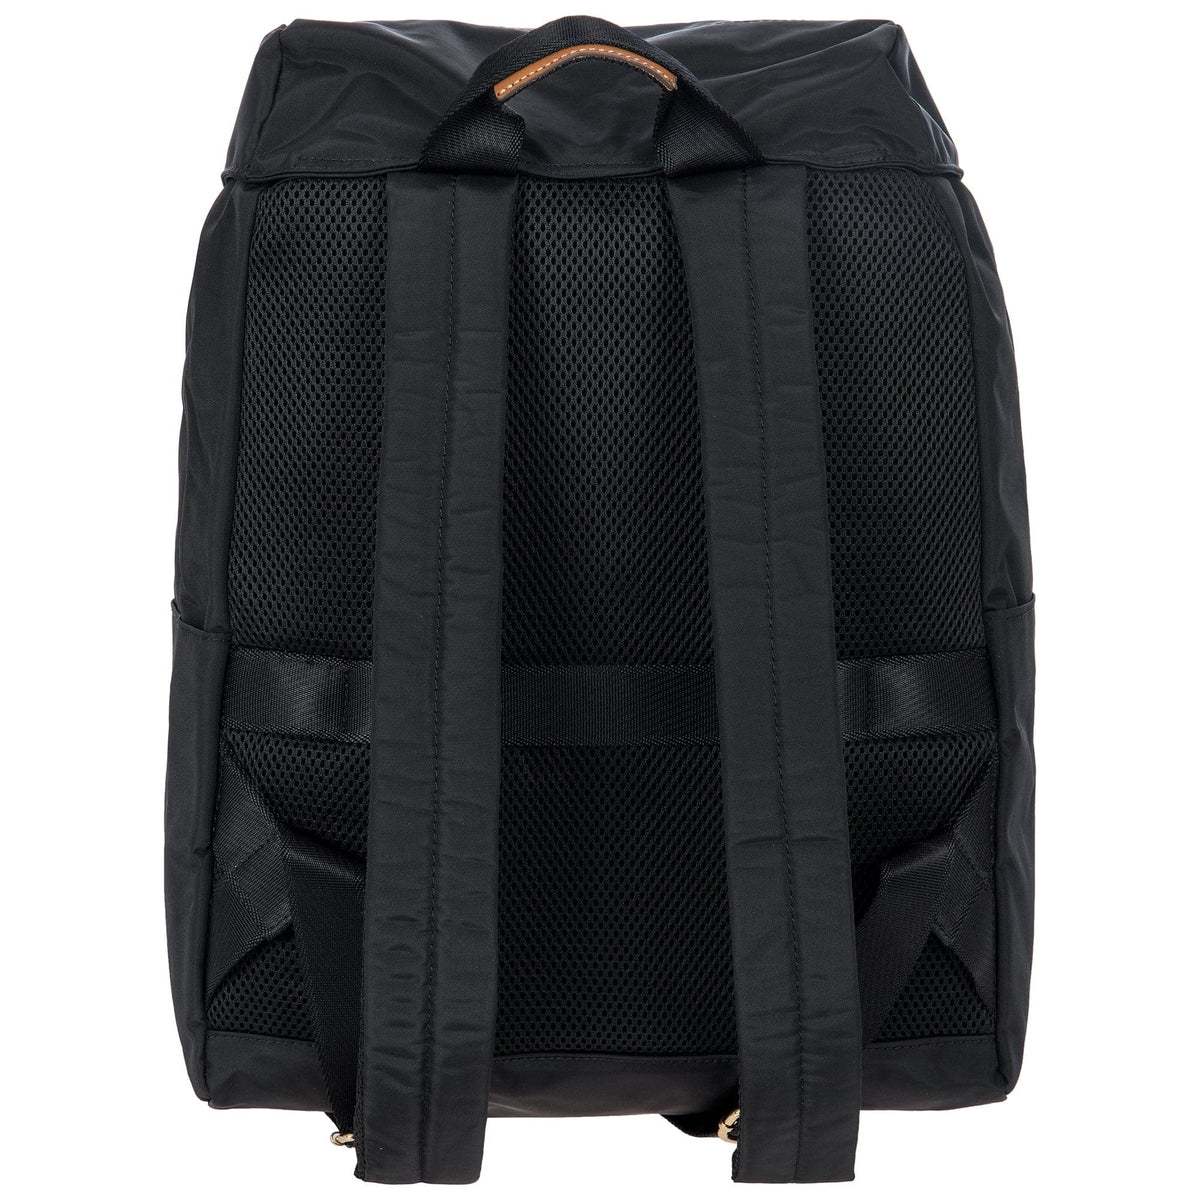 Bric's X-Bag/X-Travel Excursion Backpack